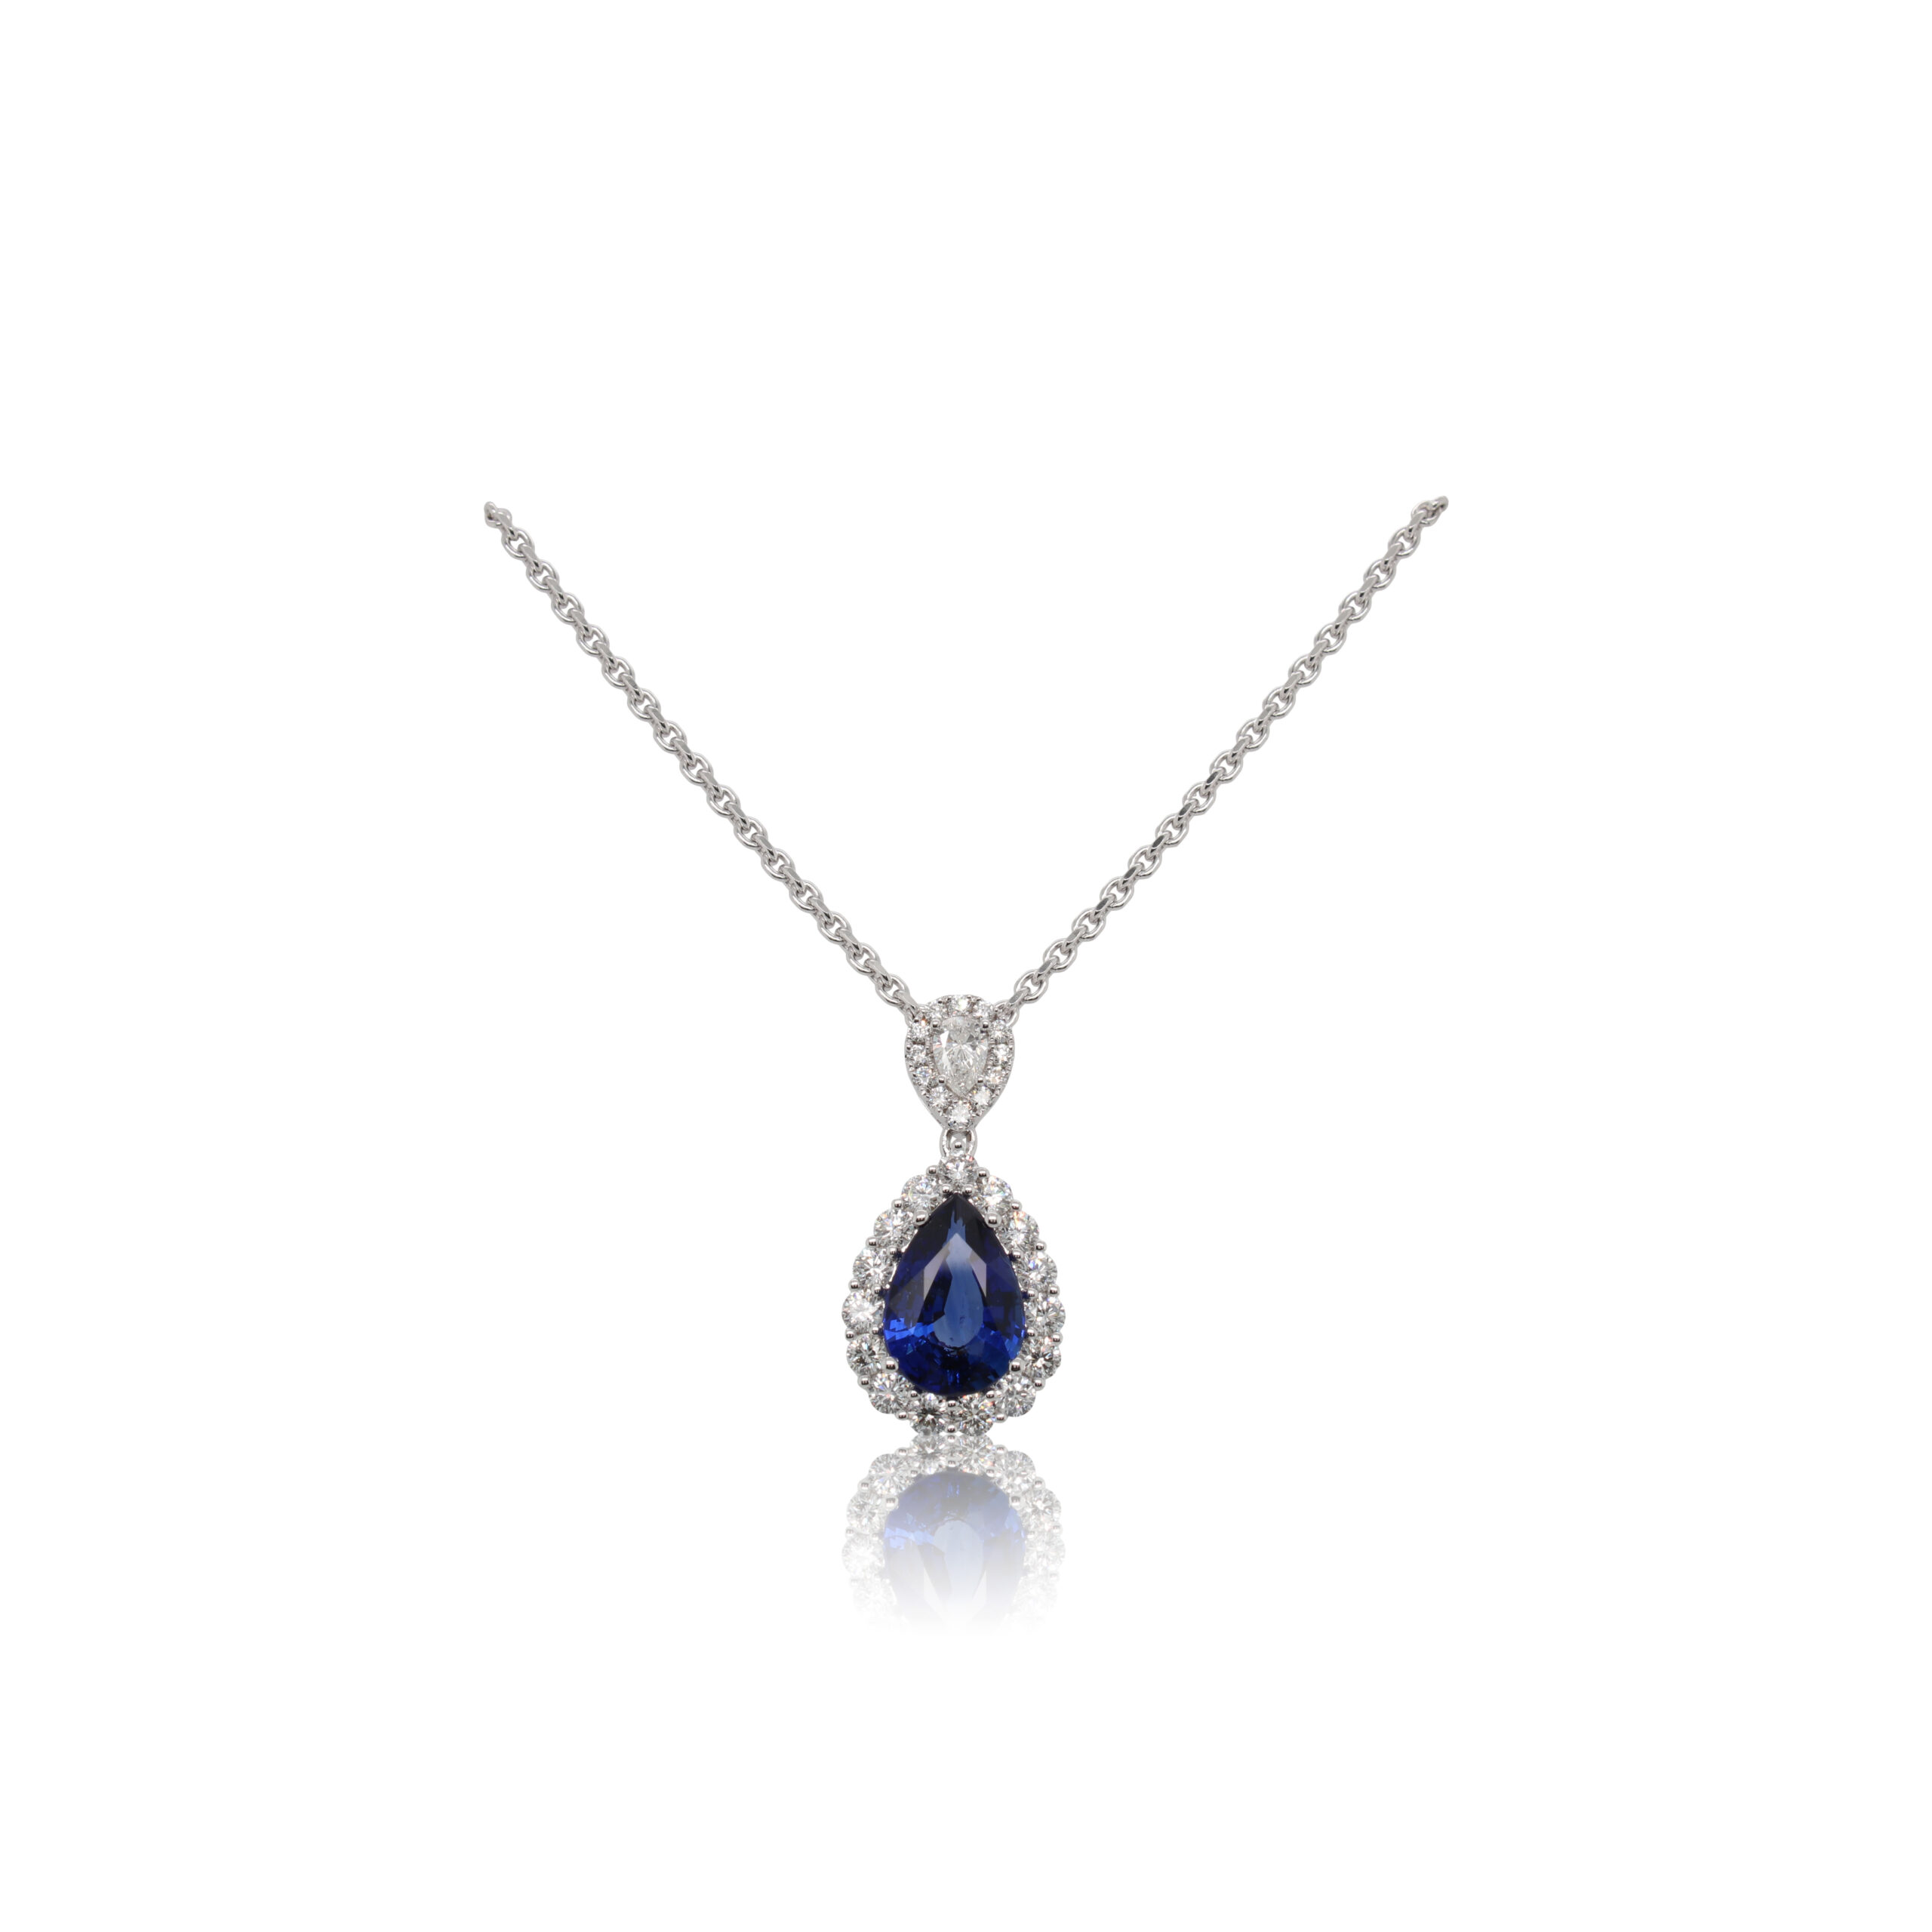 This necklace by Spark Creations is crafted from 18k white gold and features a 3.07 carat pear shaped sapphire and 1.05 total carats of diamonds around the halo.